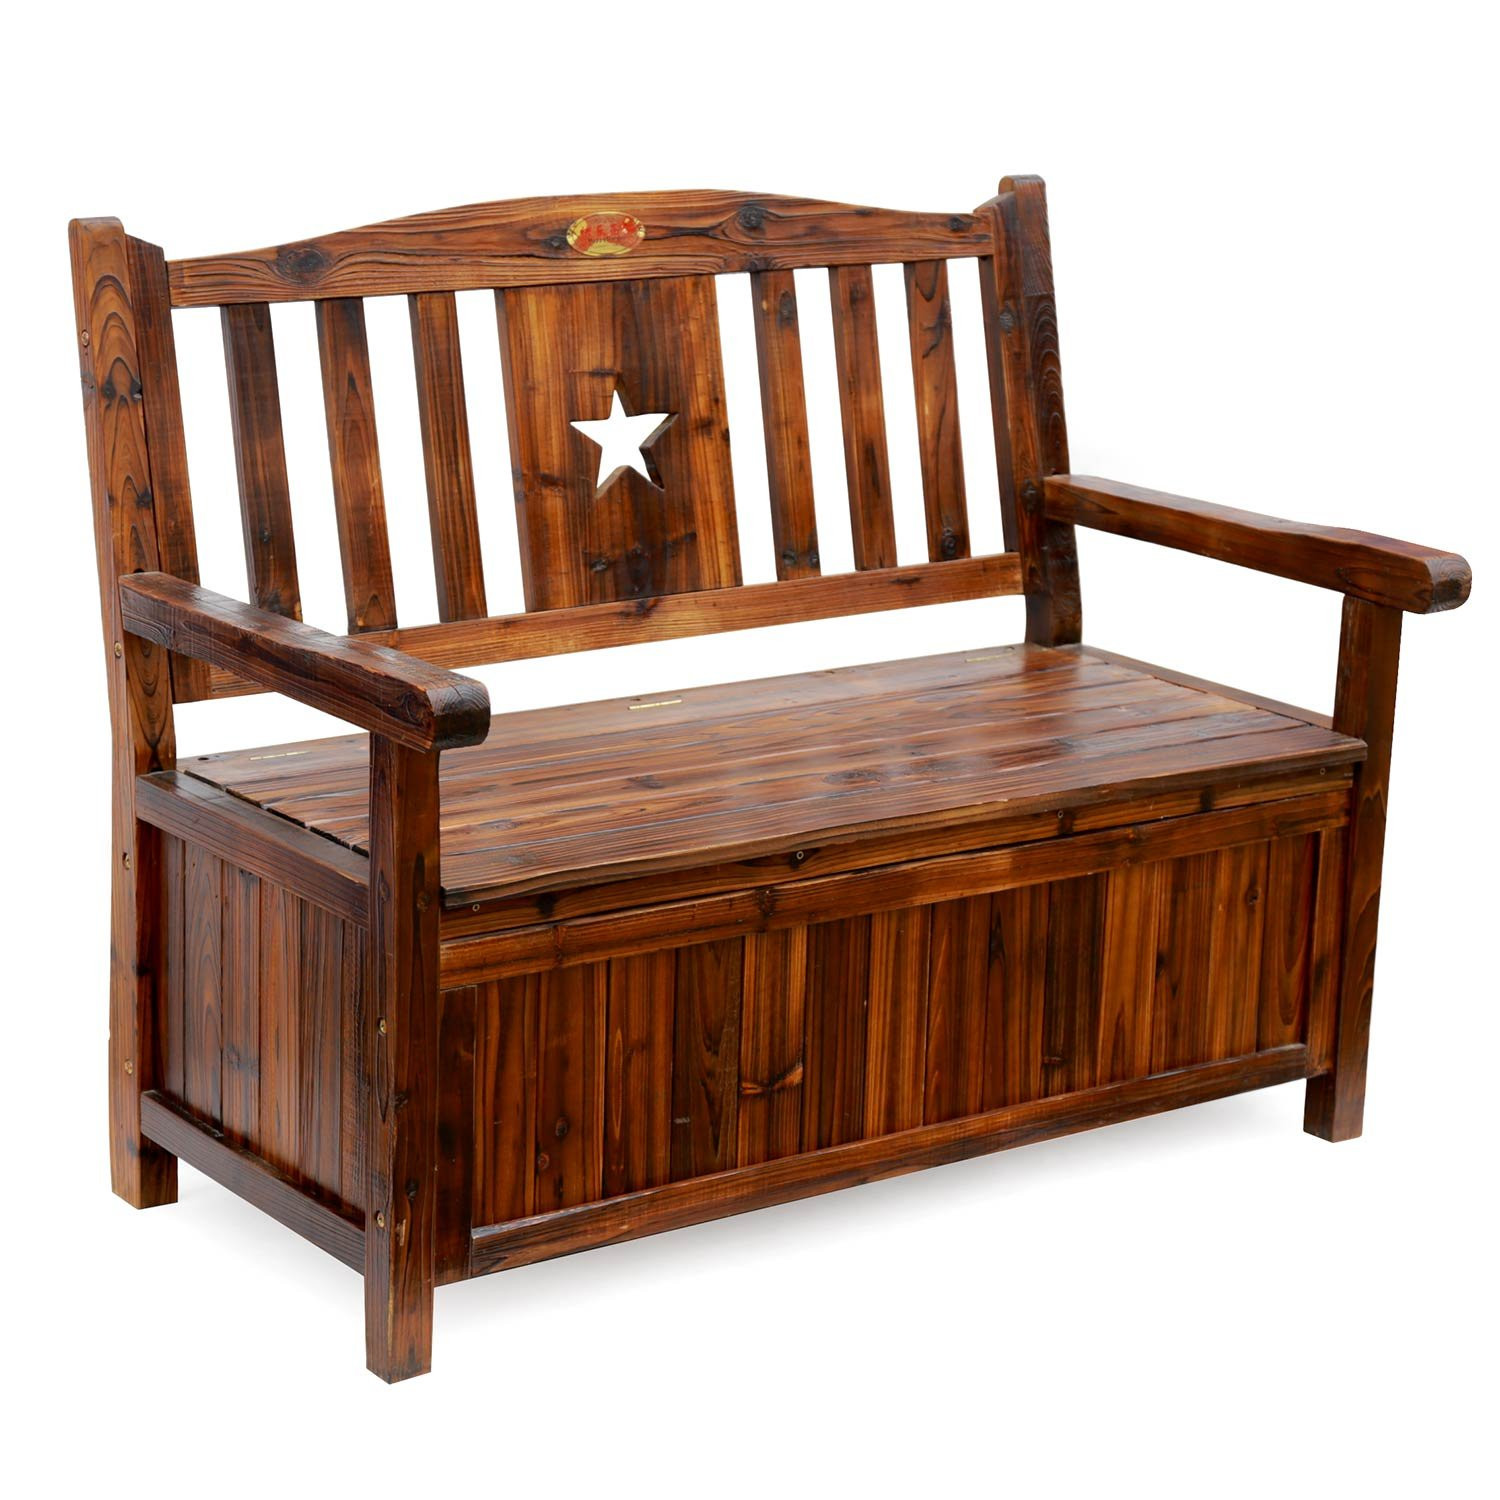 Patio Bench Storage
 Best Rated in Outdoor Storage Benches & Helpful Customer